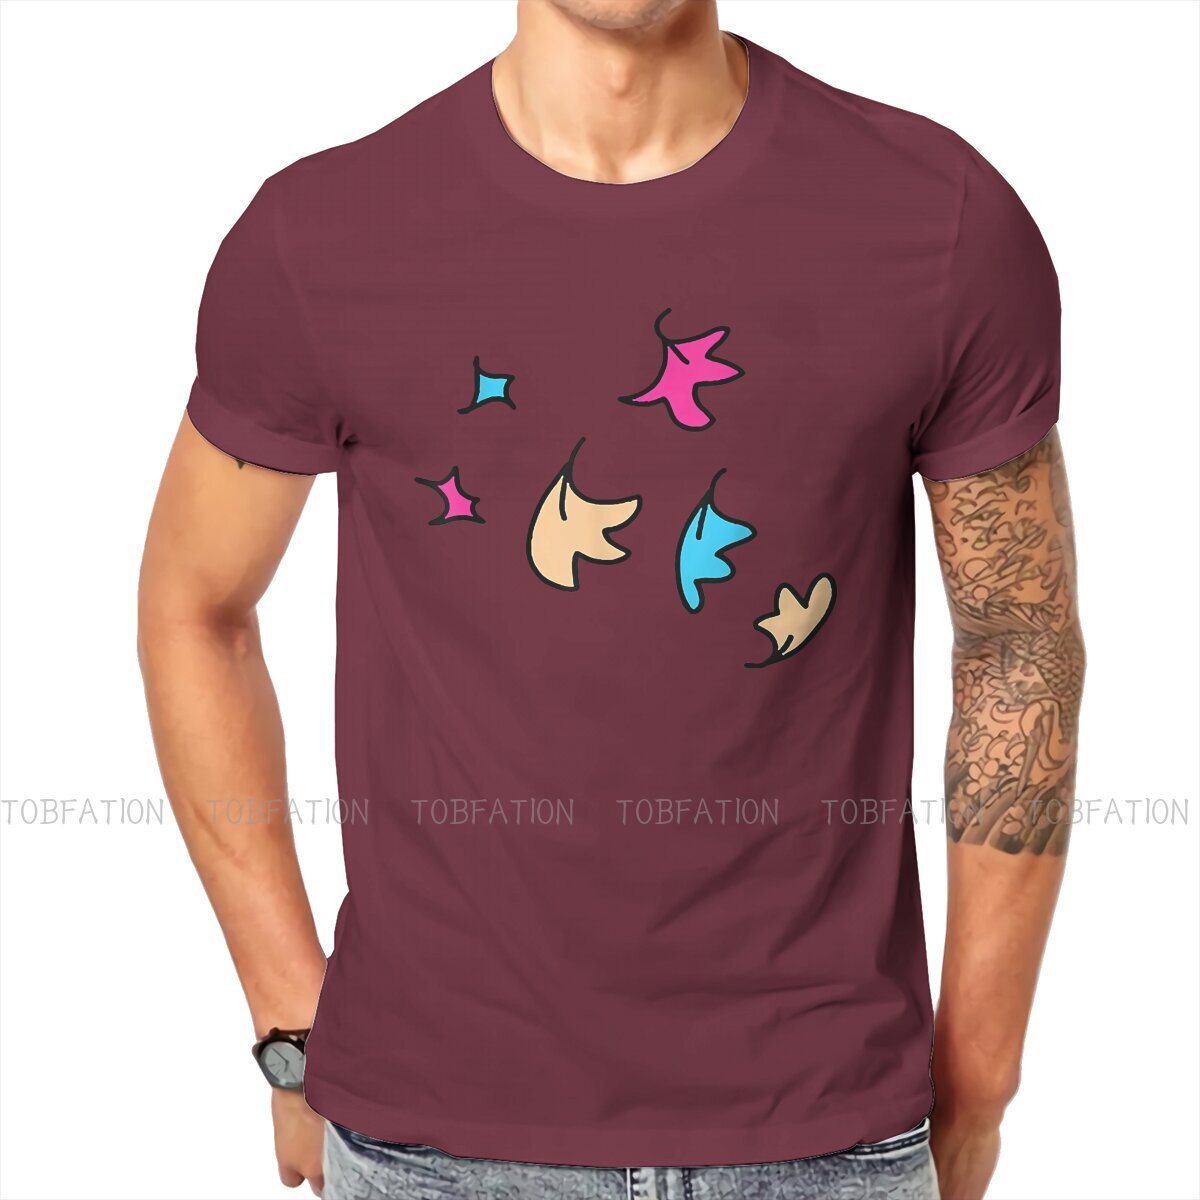 leaves symbol lover hip hop tshirt alice oseman heartstopper comic creative tops leisure t shirt male tee unique gift clothes 2347